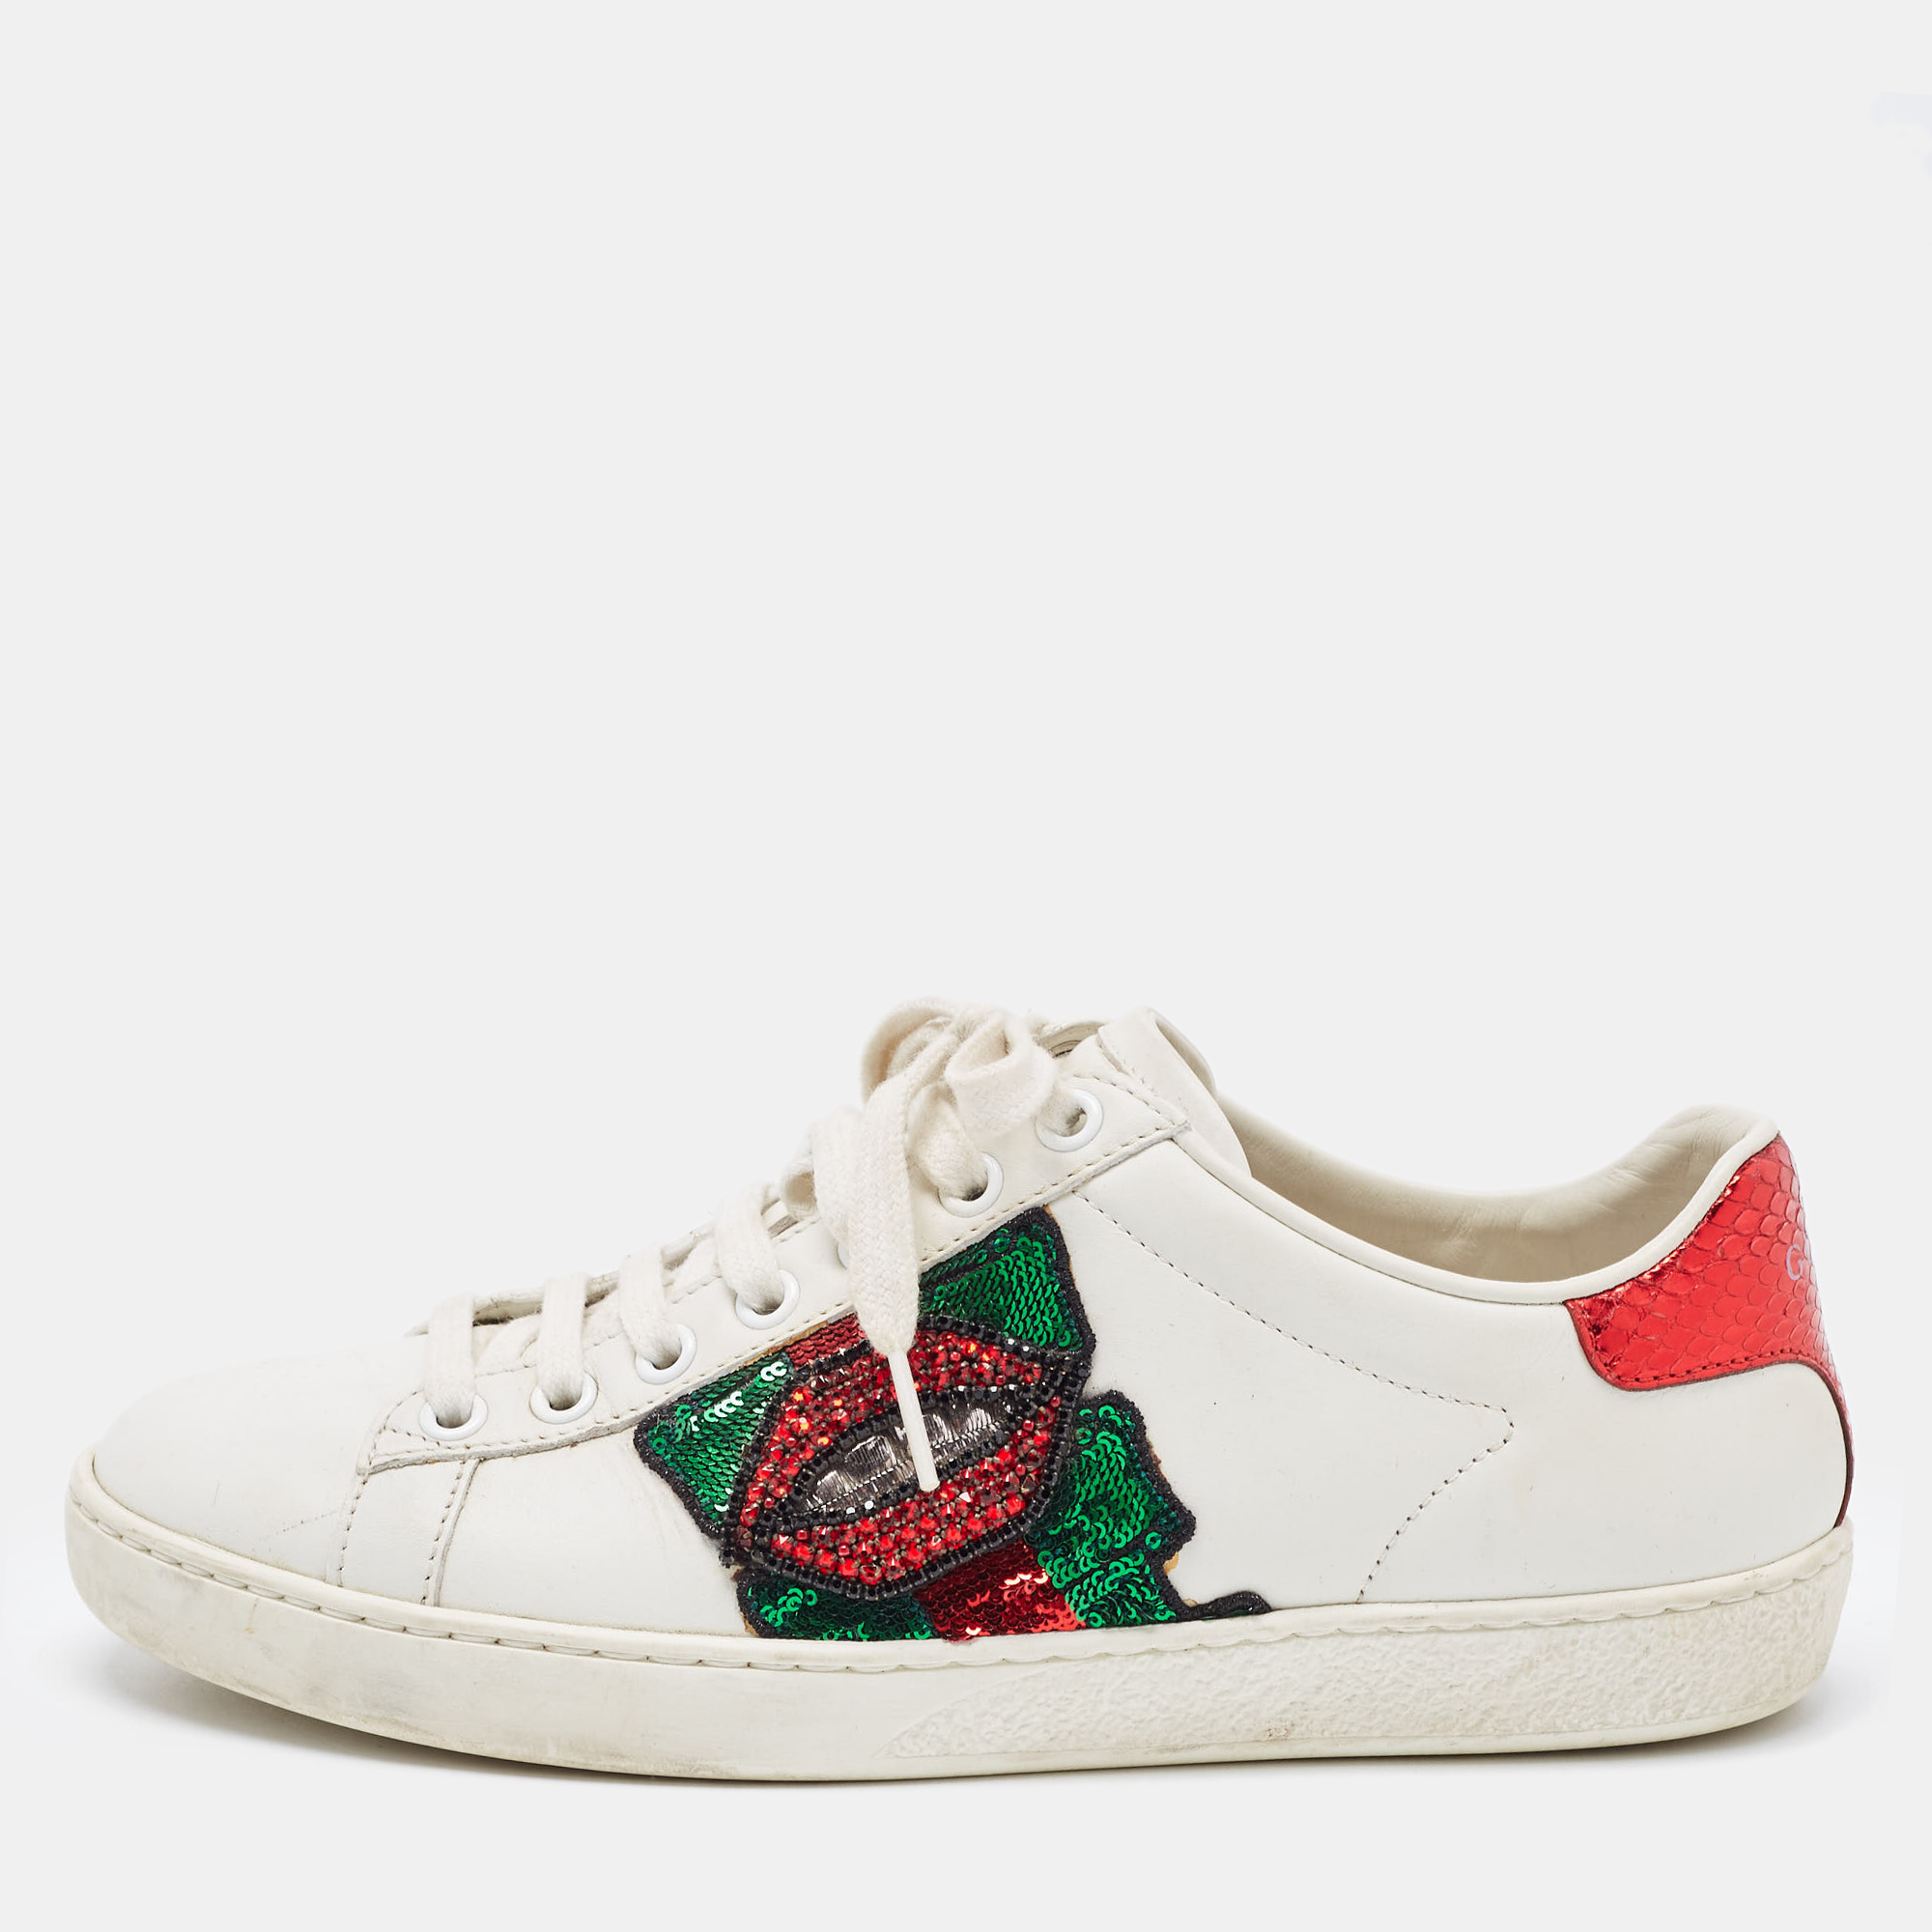 Upgrade your style with these Gucci sneakers. Meticulously designed for fashion and comfort theyre the ideal choice for a trendy and comfortable stride.